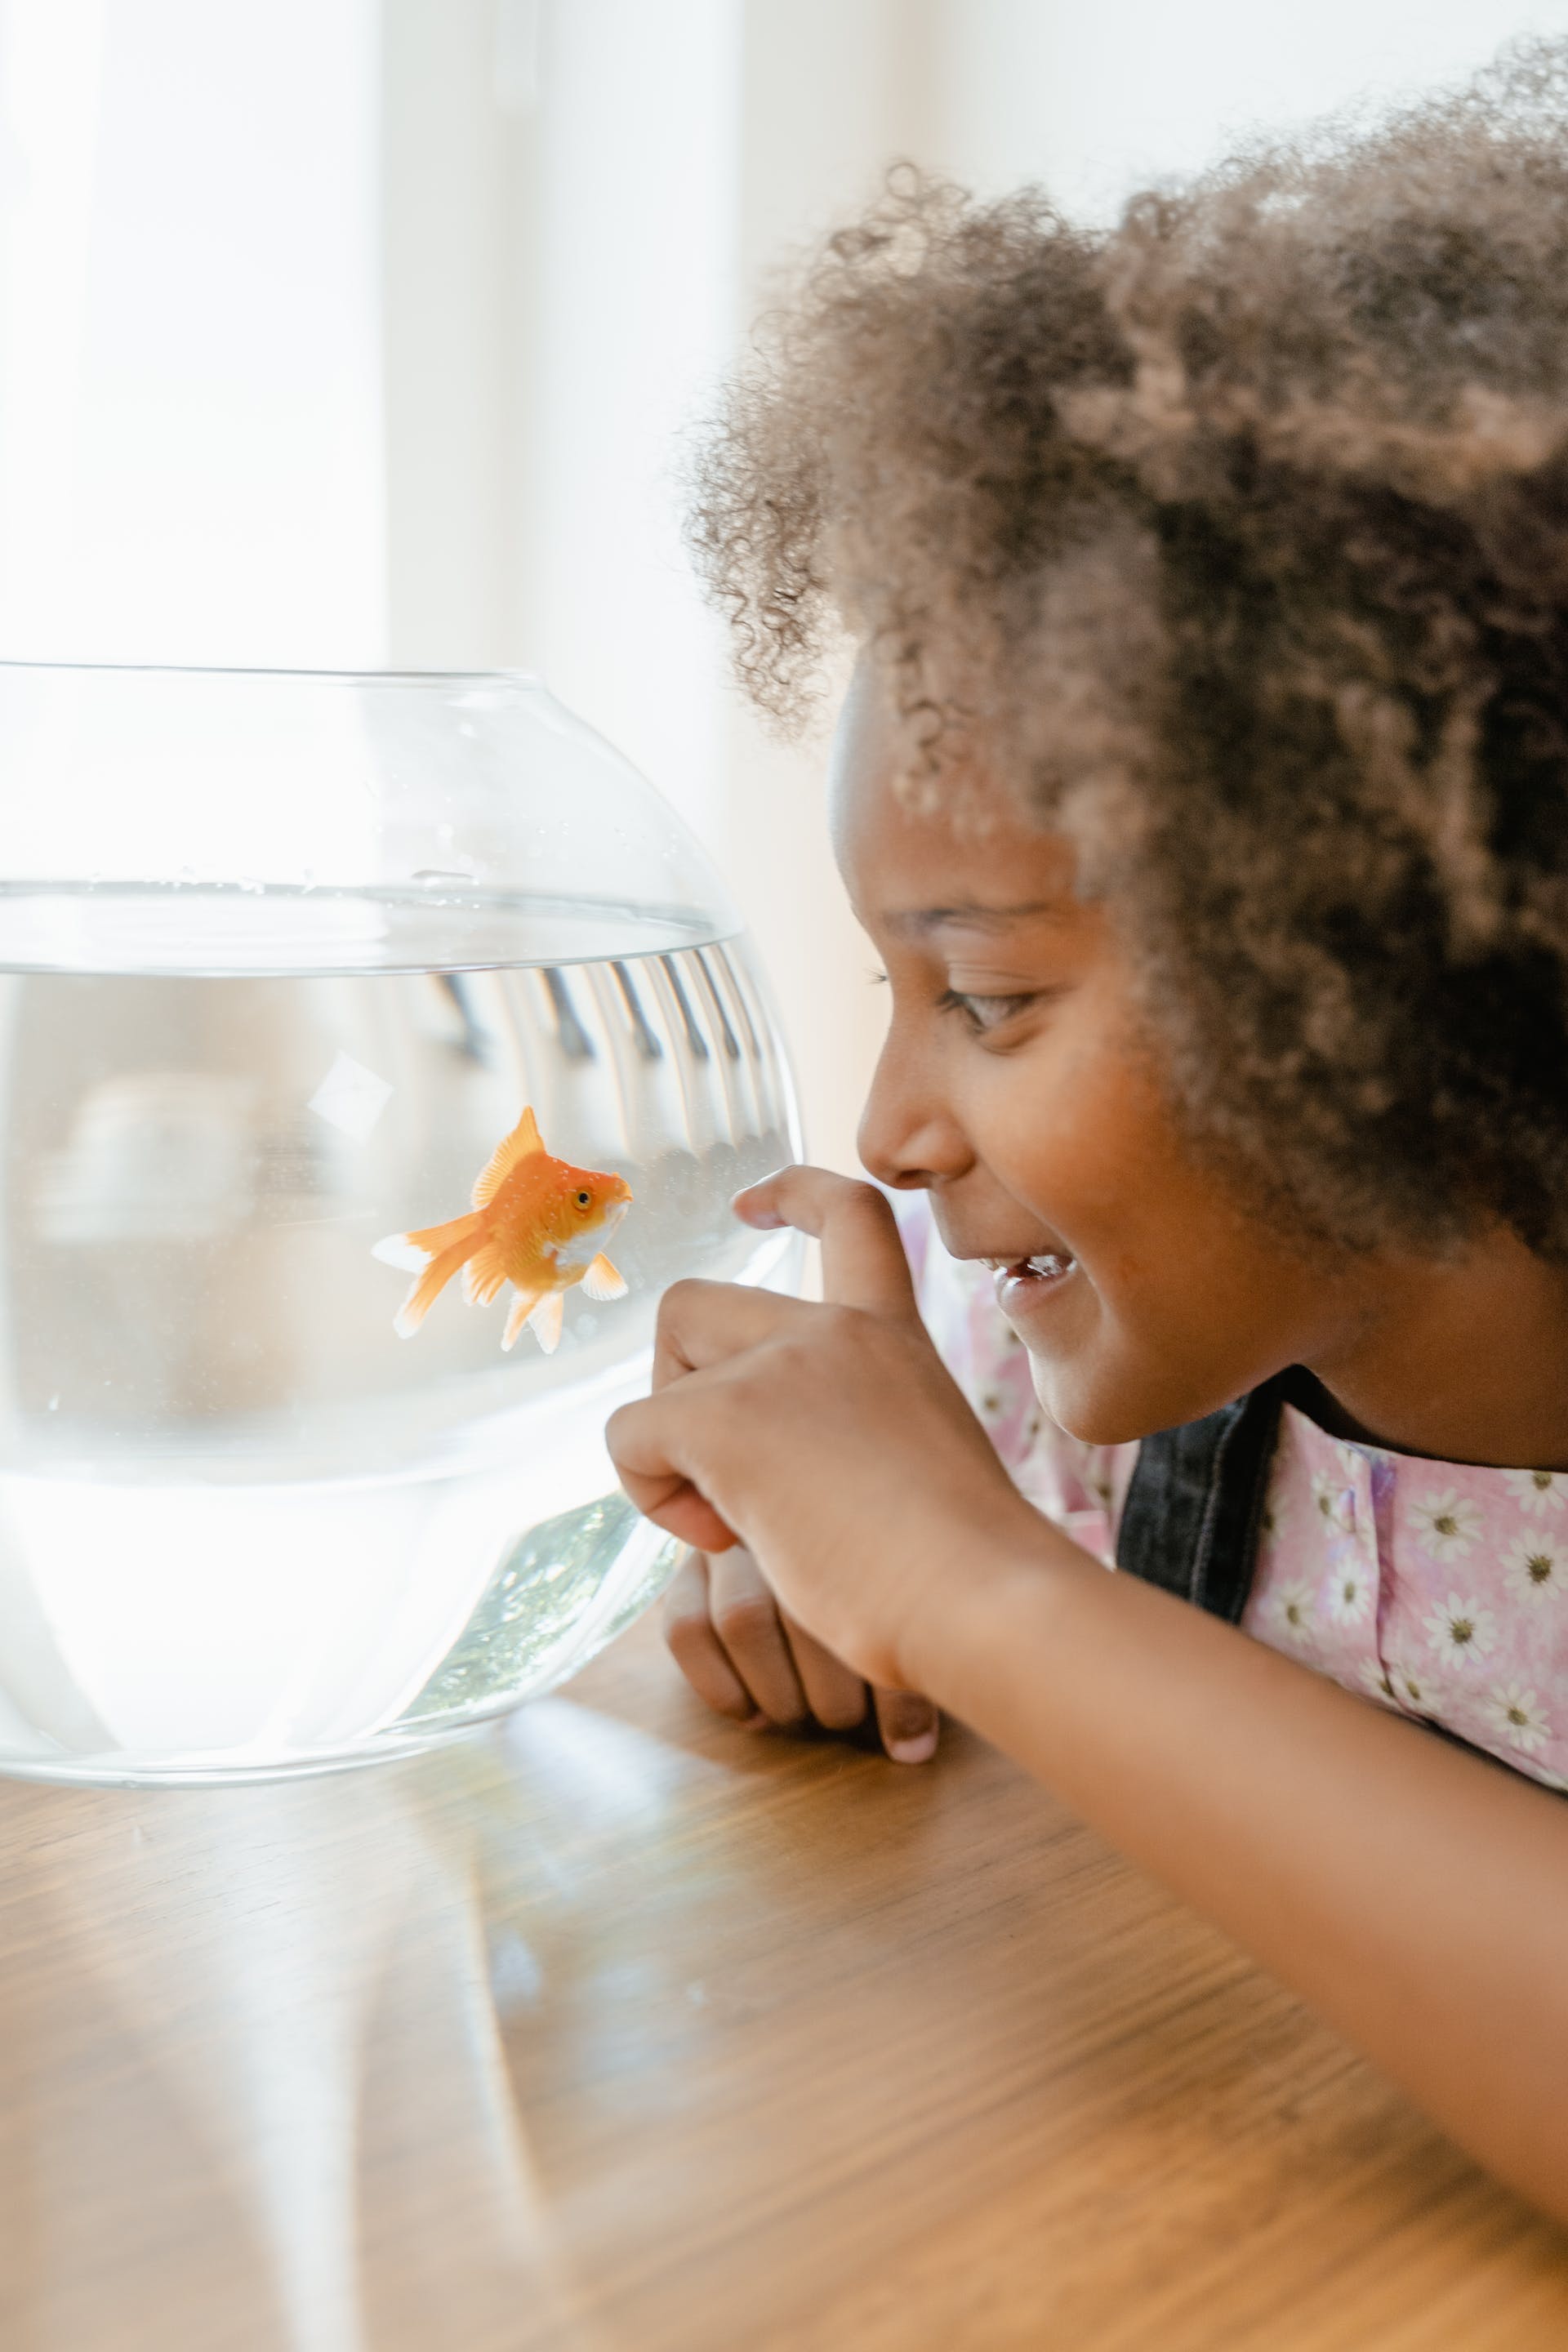 A child looking at a goldfish | Source: Pexels